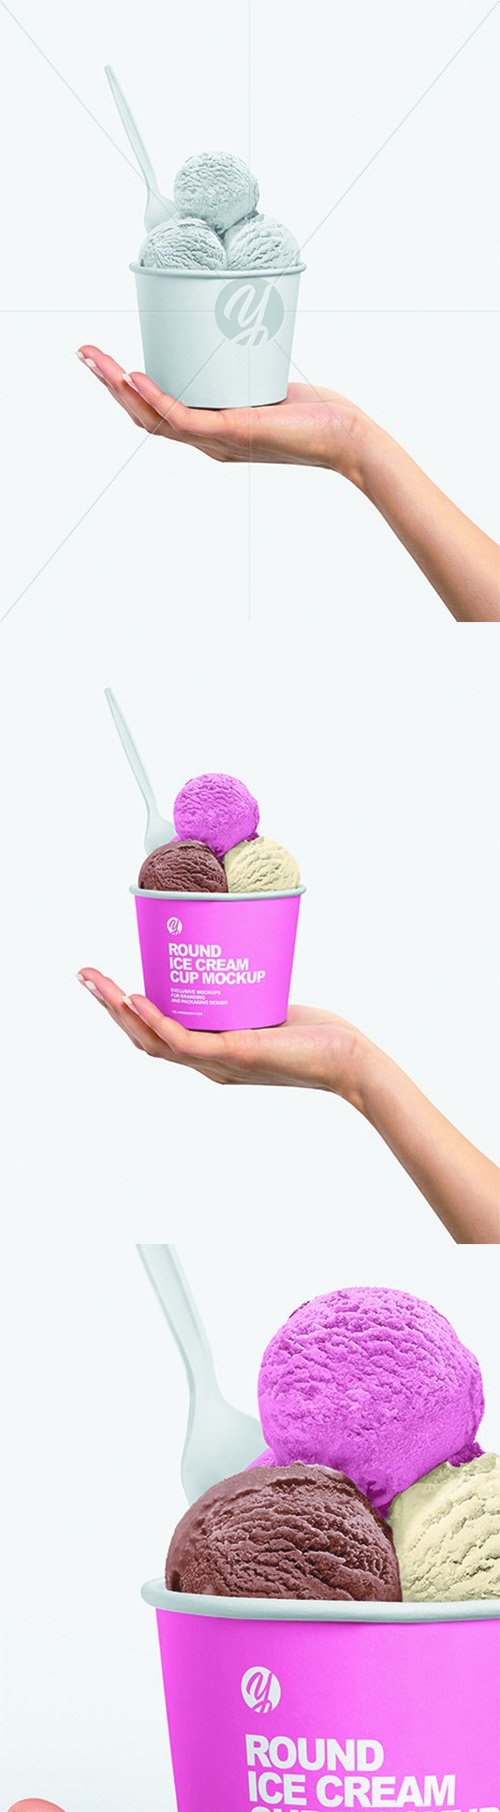 Paper Ice Cream Cup in Hand Mockup 66138